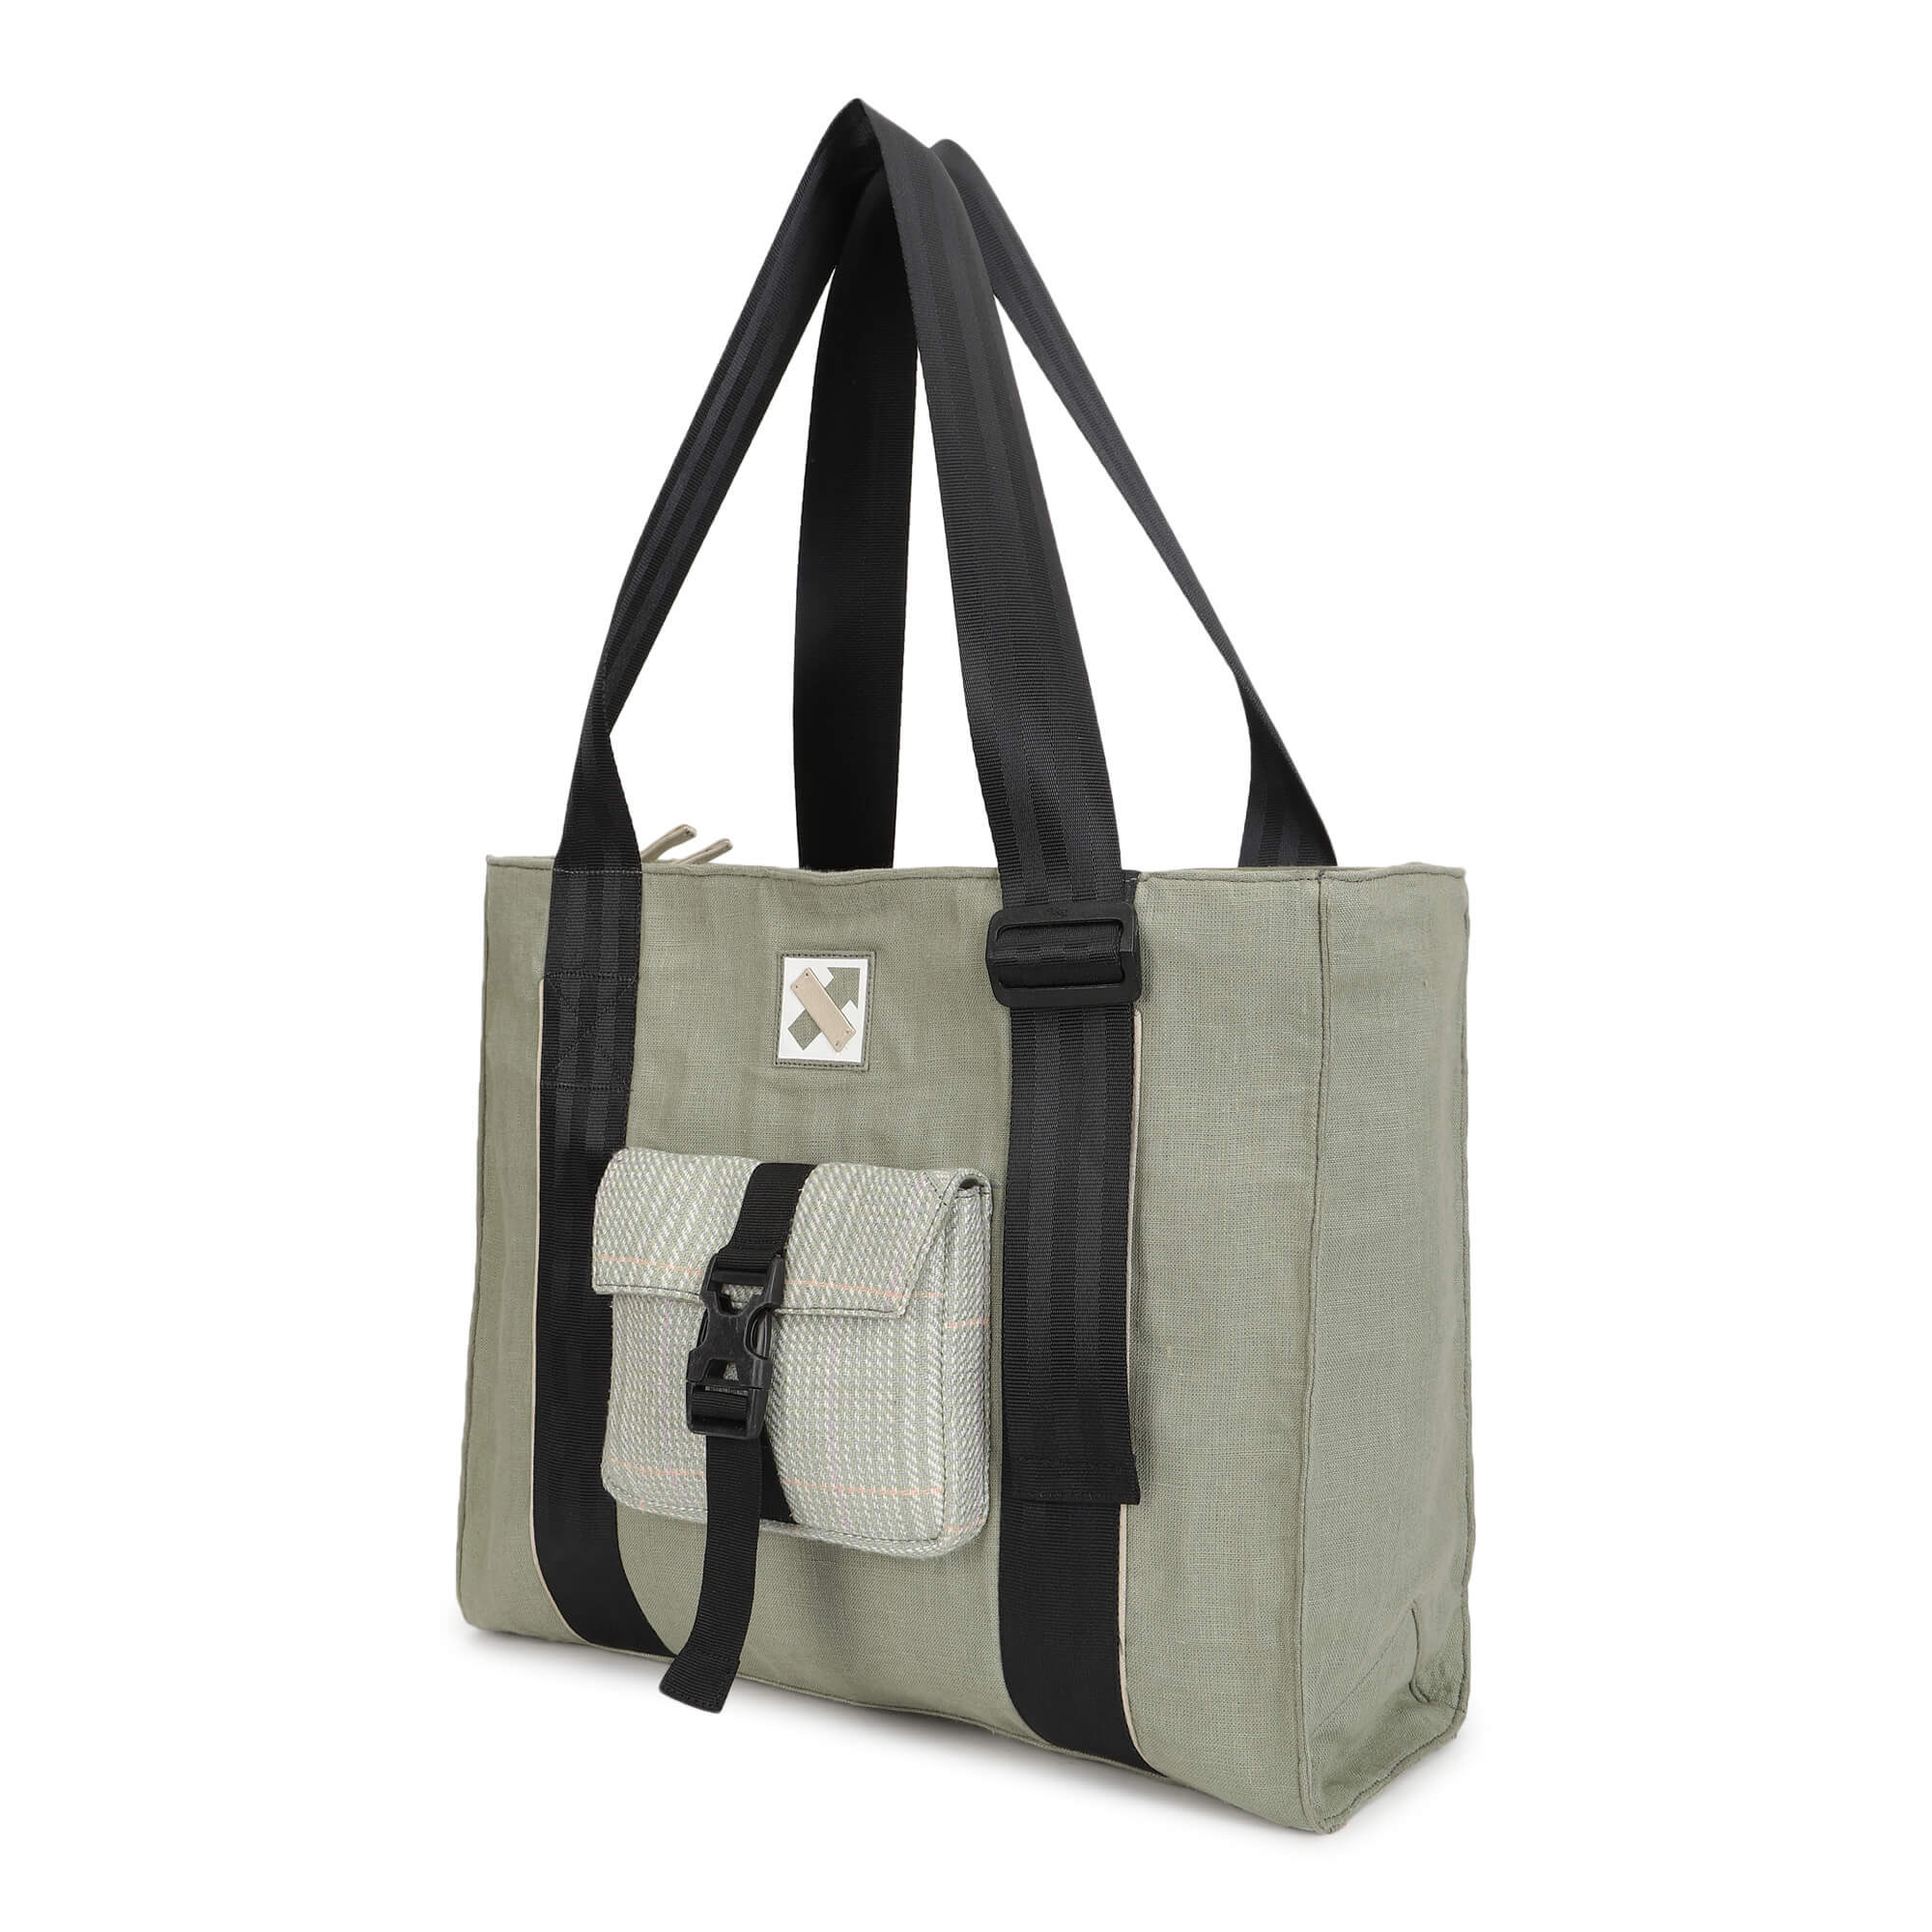 BUCKLE UP 102.11 LAPTOP TOTE